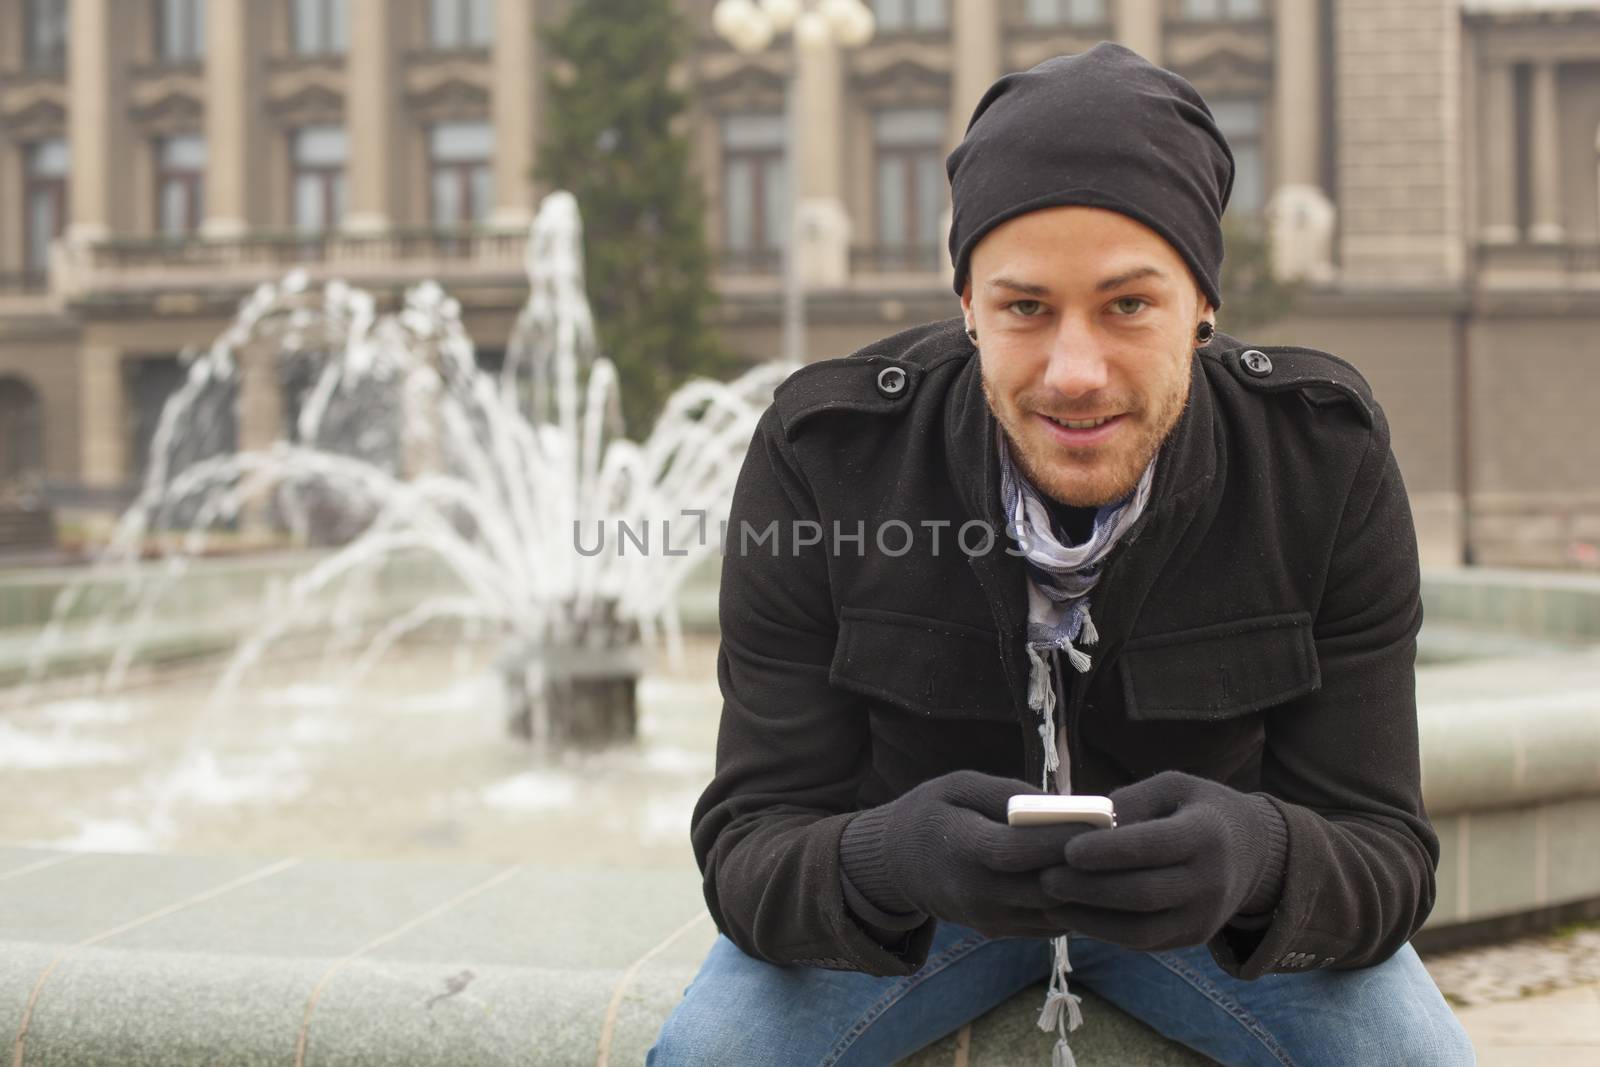 Guy On Traveling With Mobile Phone And Hat In City, Urban Space by adamr